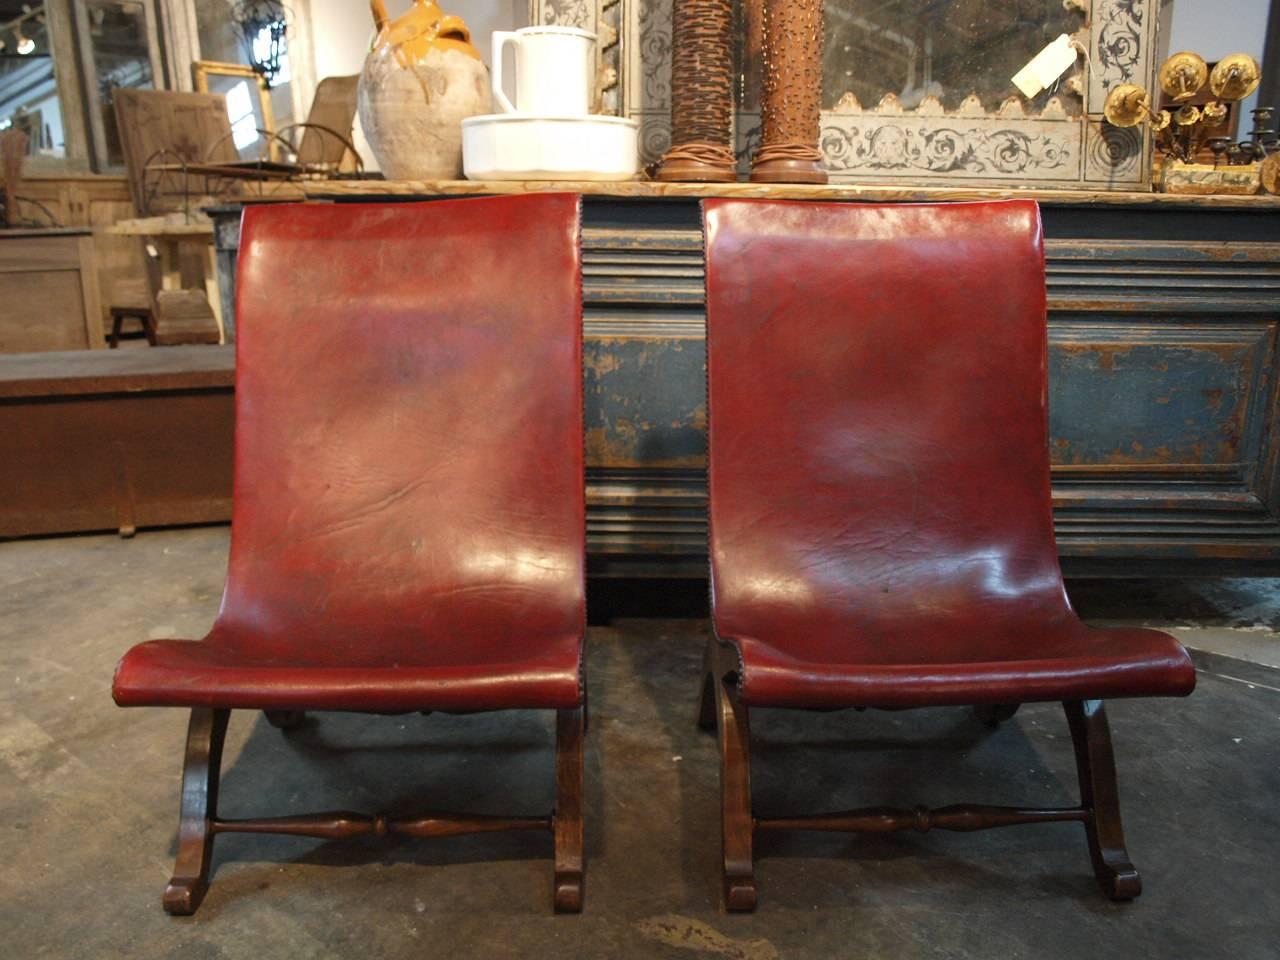 A terrific pair of early 20th century low sling back slipper chairs. Beautifully constructed in walnut and leather. Great nailhead detail. These chairs are very comfortable.